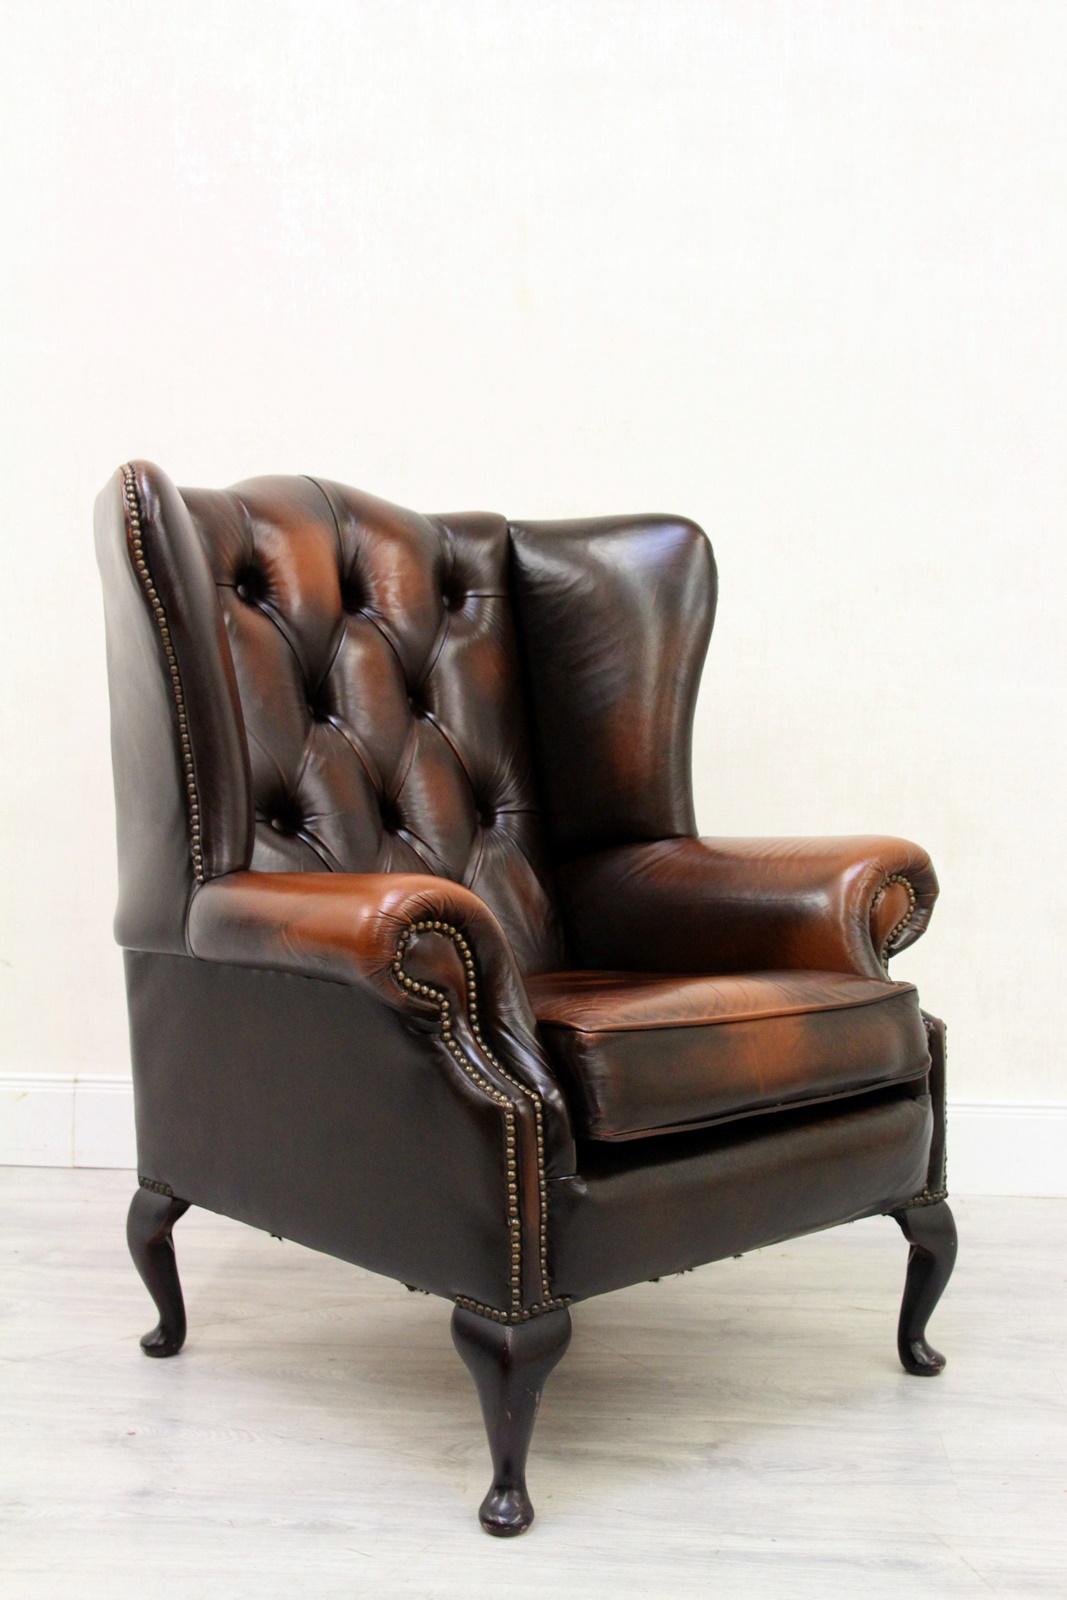 Chesterfield Wing Chair Armchair Recliner Antique 1